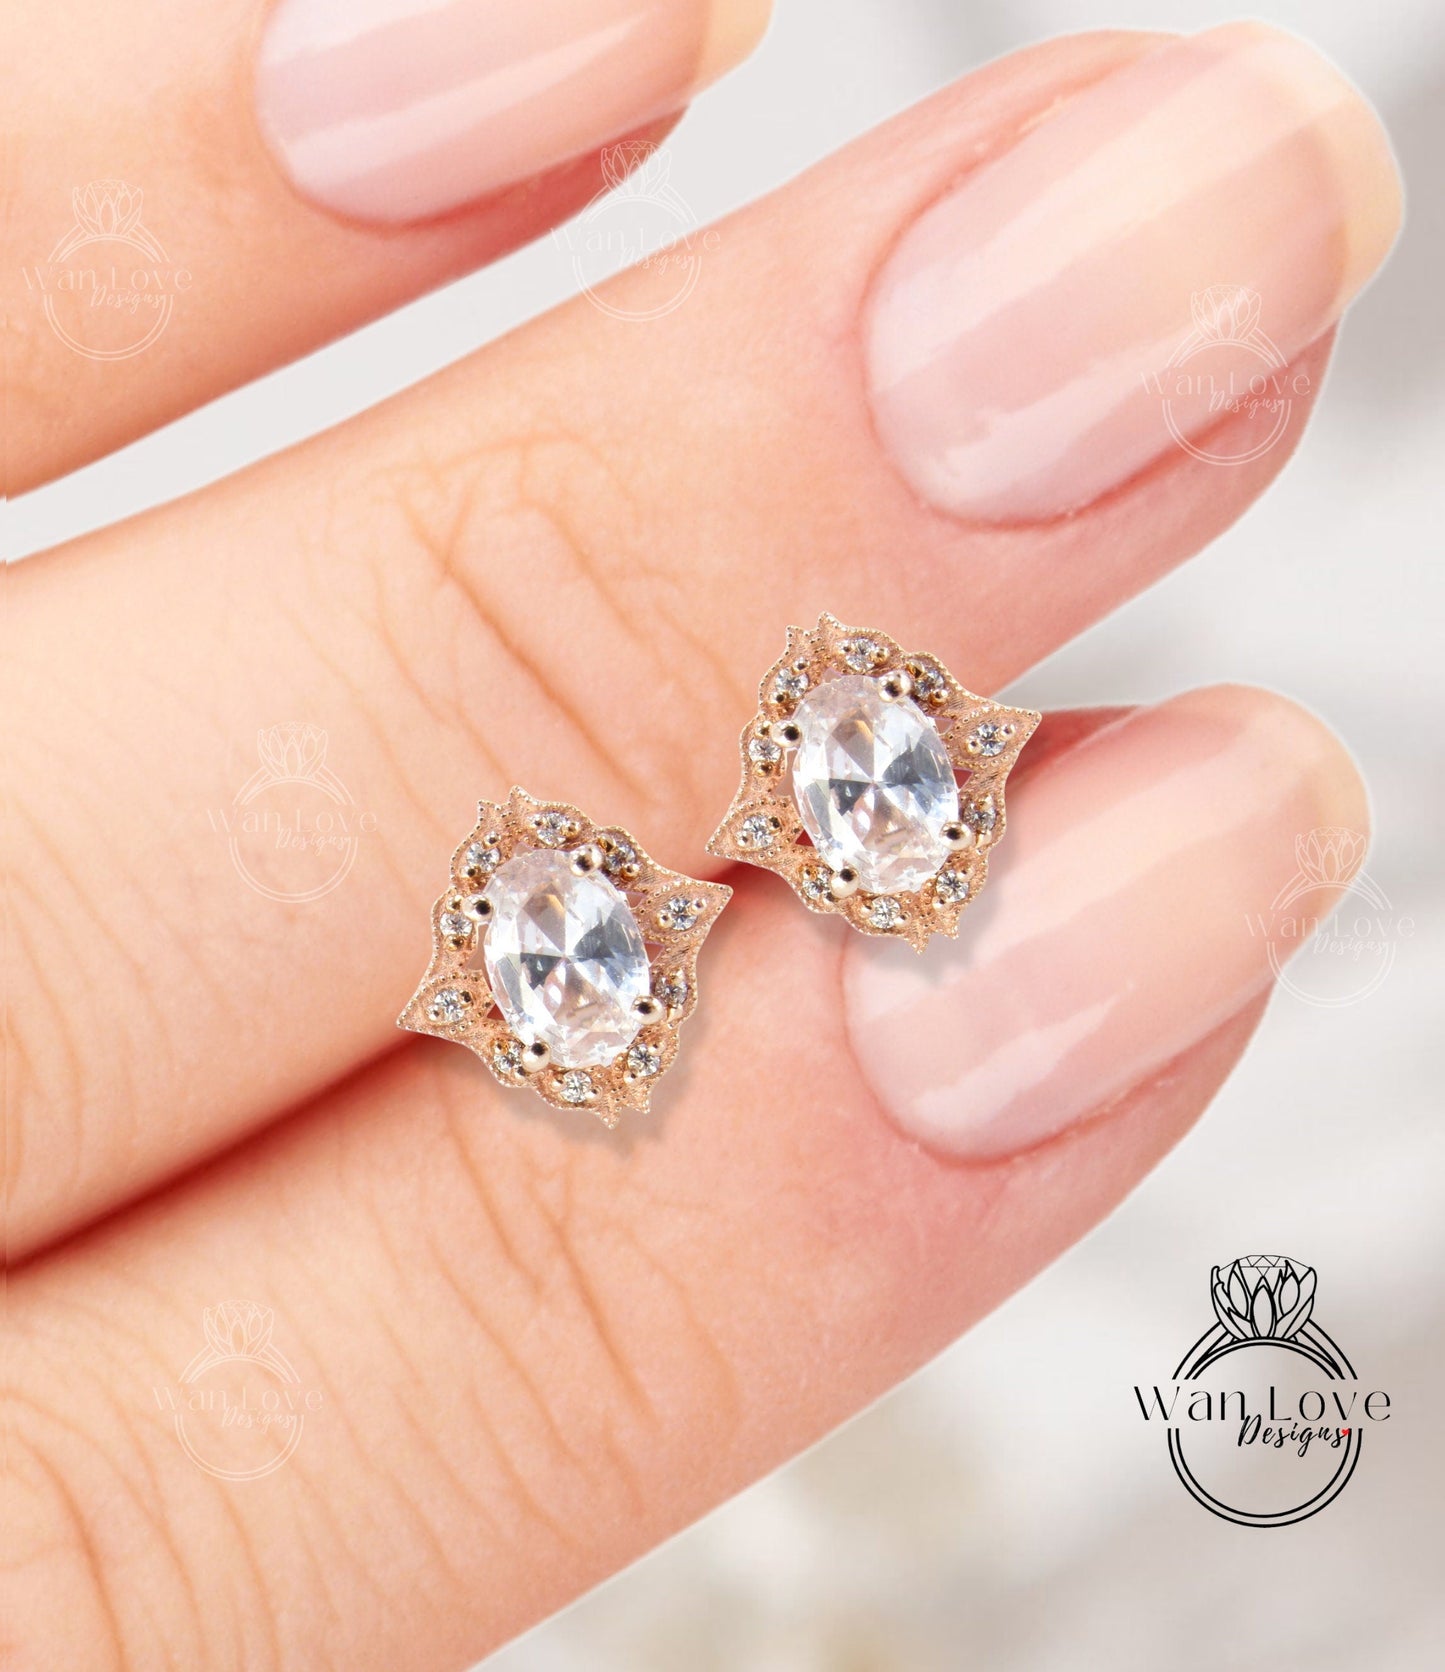 Art deco White Sapphire halo Earrings Unique vintage Moissanite milgrain Bridal studs Oval cut floral Wedding Day Anniversary jewelry gift Wan Love Designs